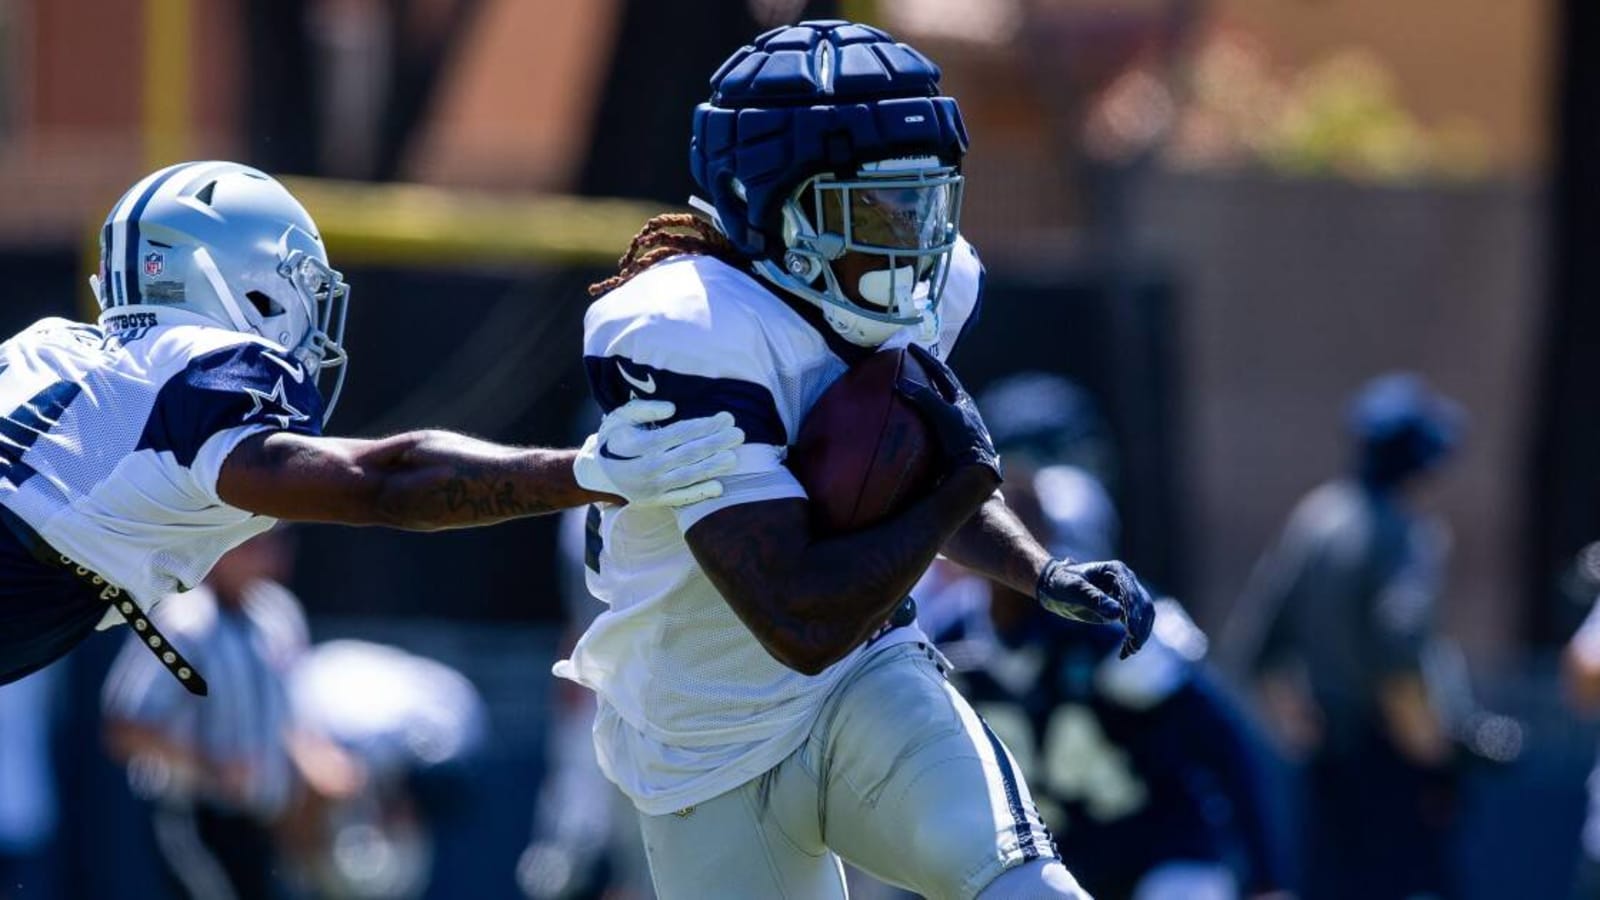 Cowboys running back Ronald Jones to miss time due to groin injury